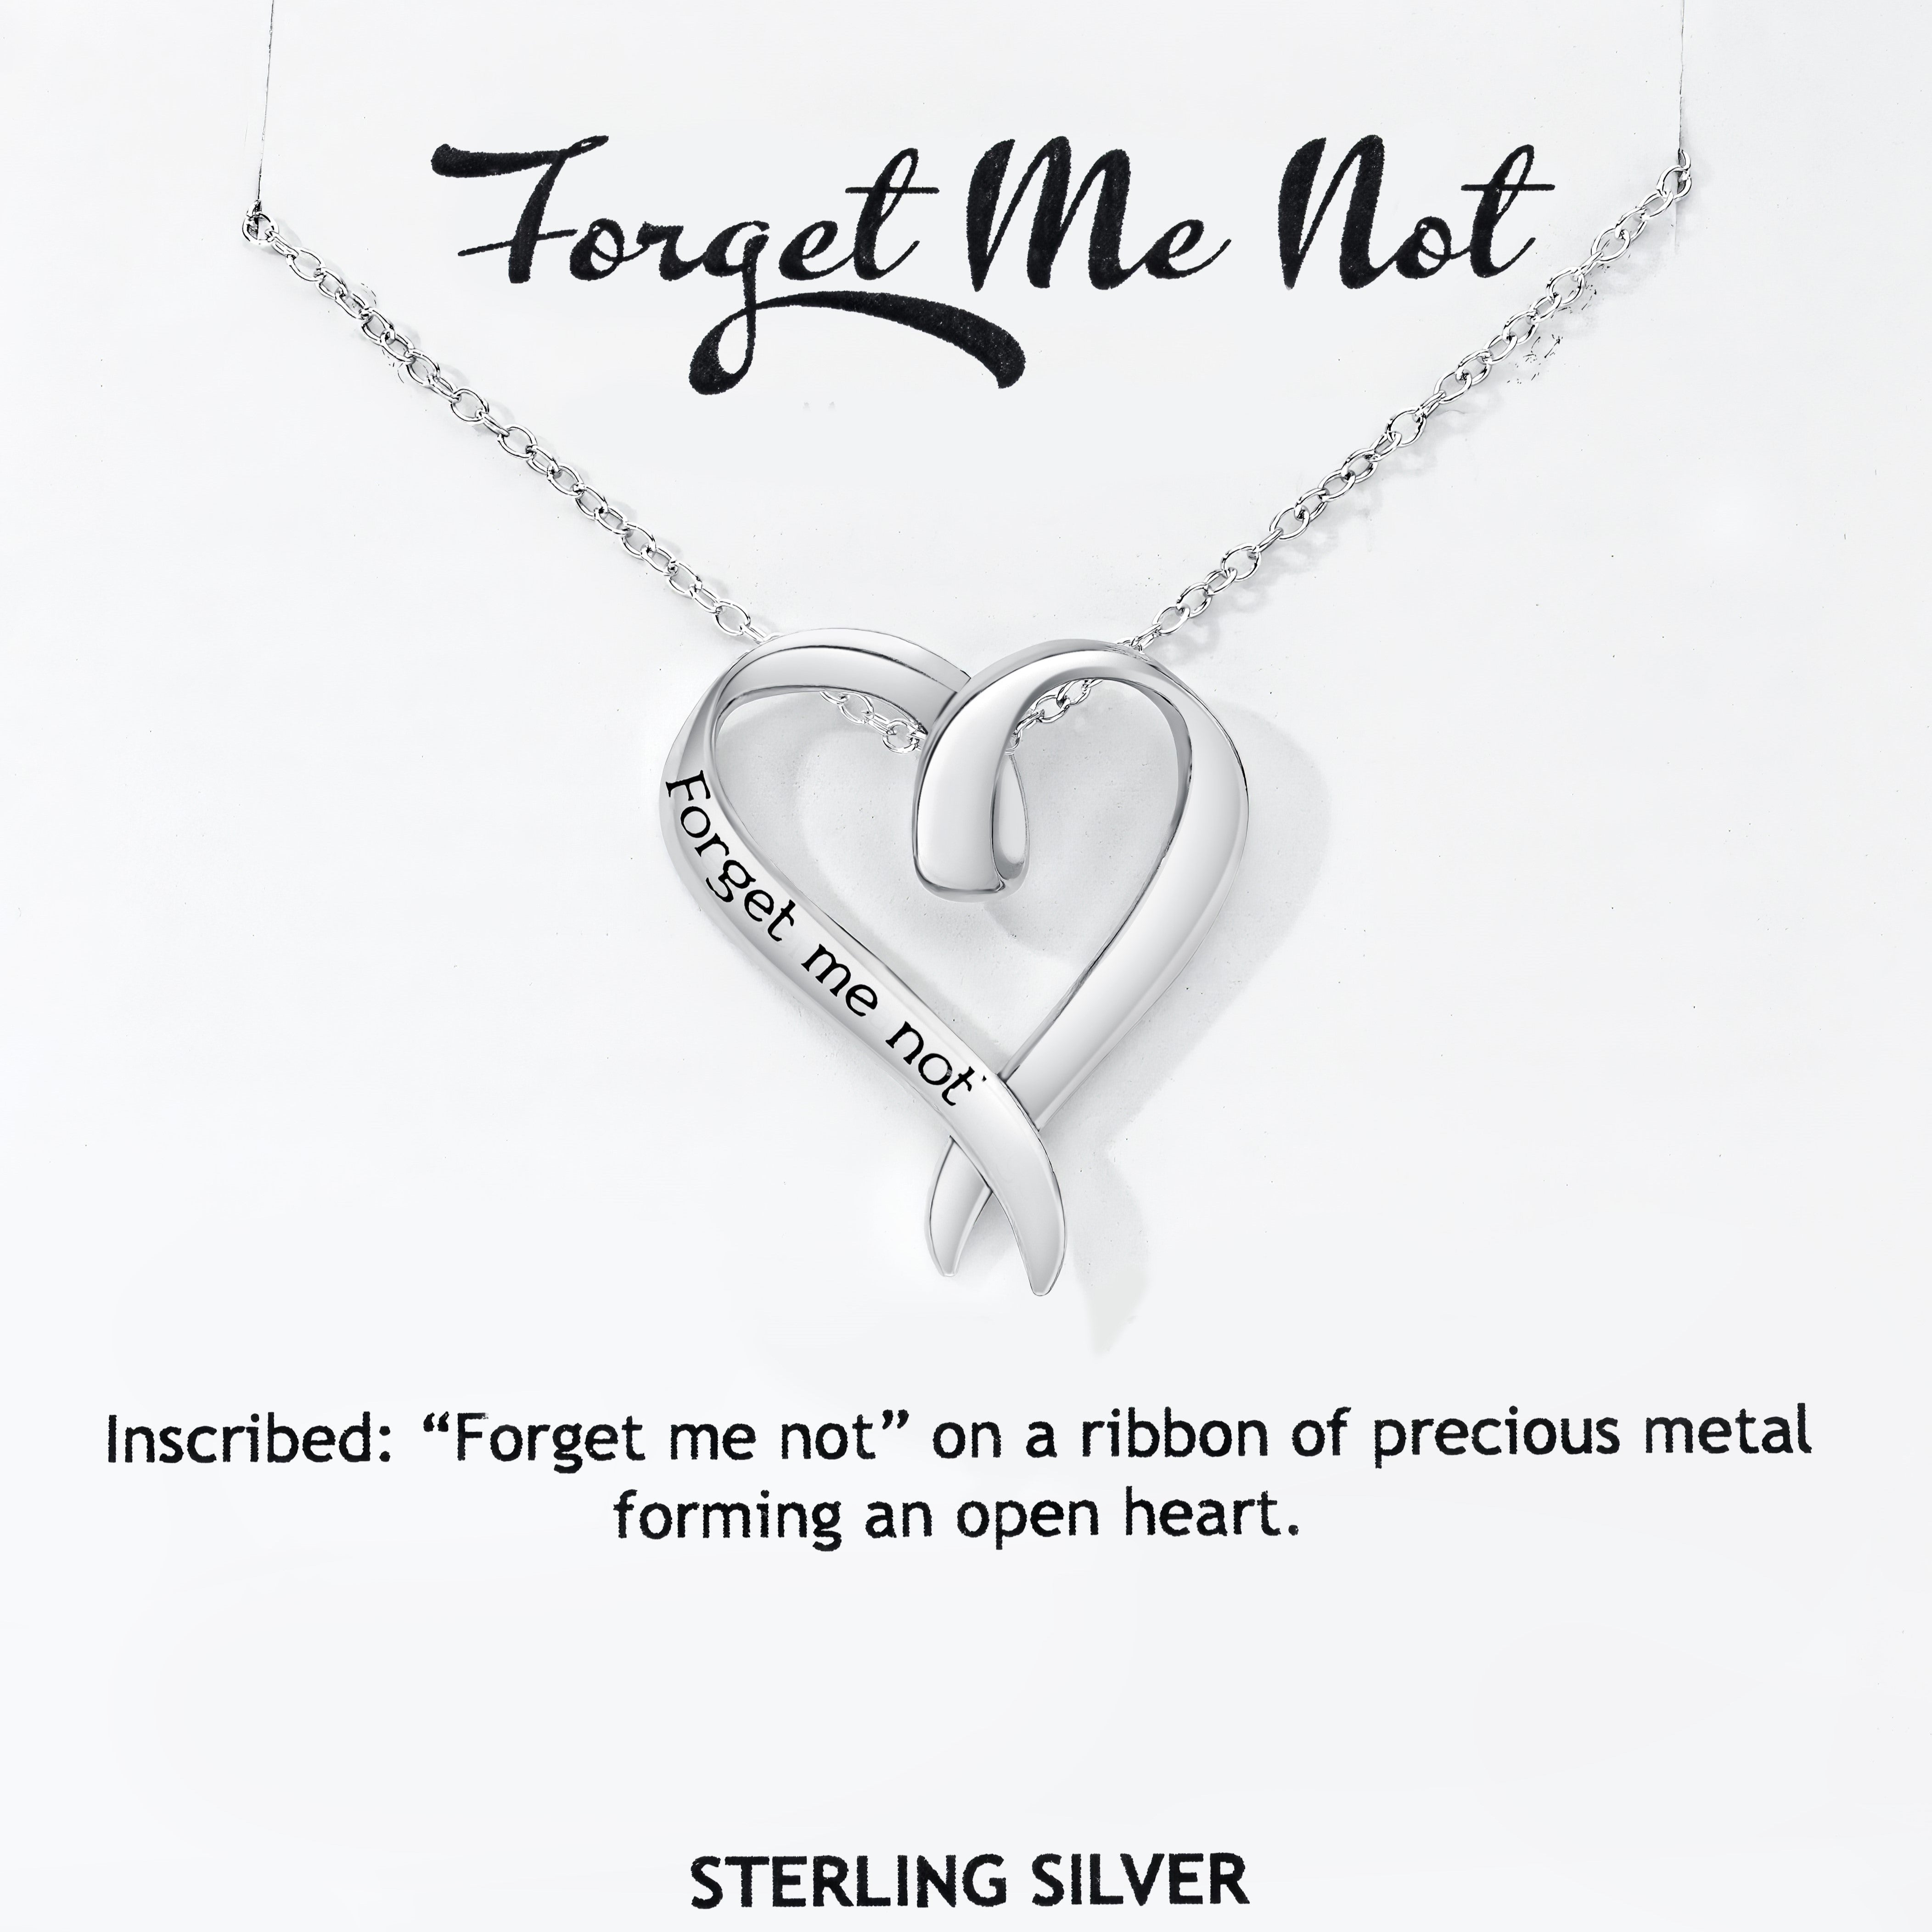 This shows the Ribbon Pendant on a chain on a 3" x 3" card packaging. With the printed title 'Forget Me Not'